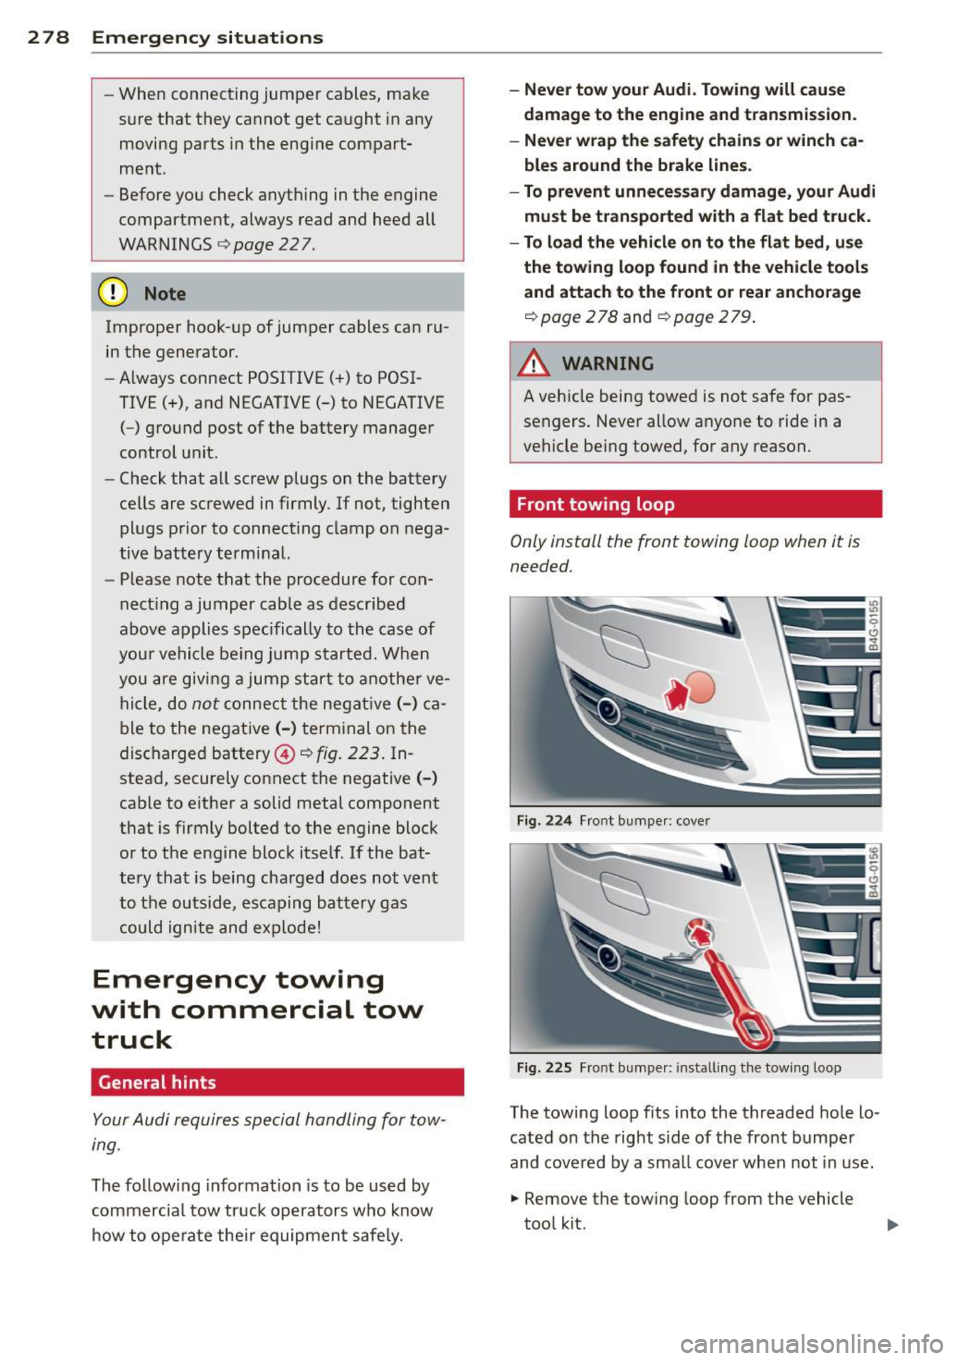 AUDI A7 2014  Owners Manual 2 78  Emergency  situations 
-When  connecting  jumper  cables,  make 
sure  that  they  cannot  get  caught  in any 
moving  parts  in the  engine  compart­
ment. 
- Before  you  check  anything  in